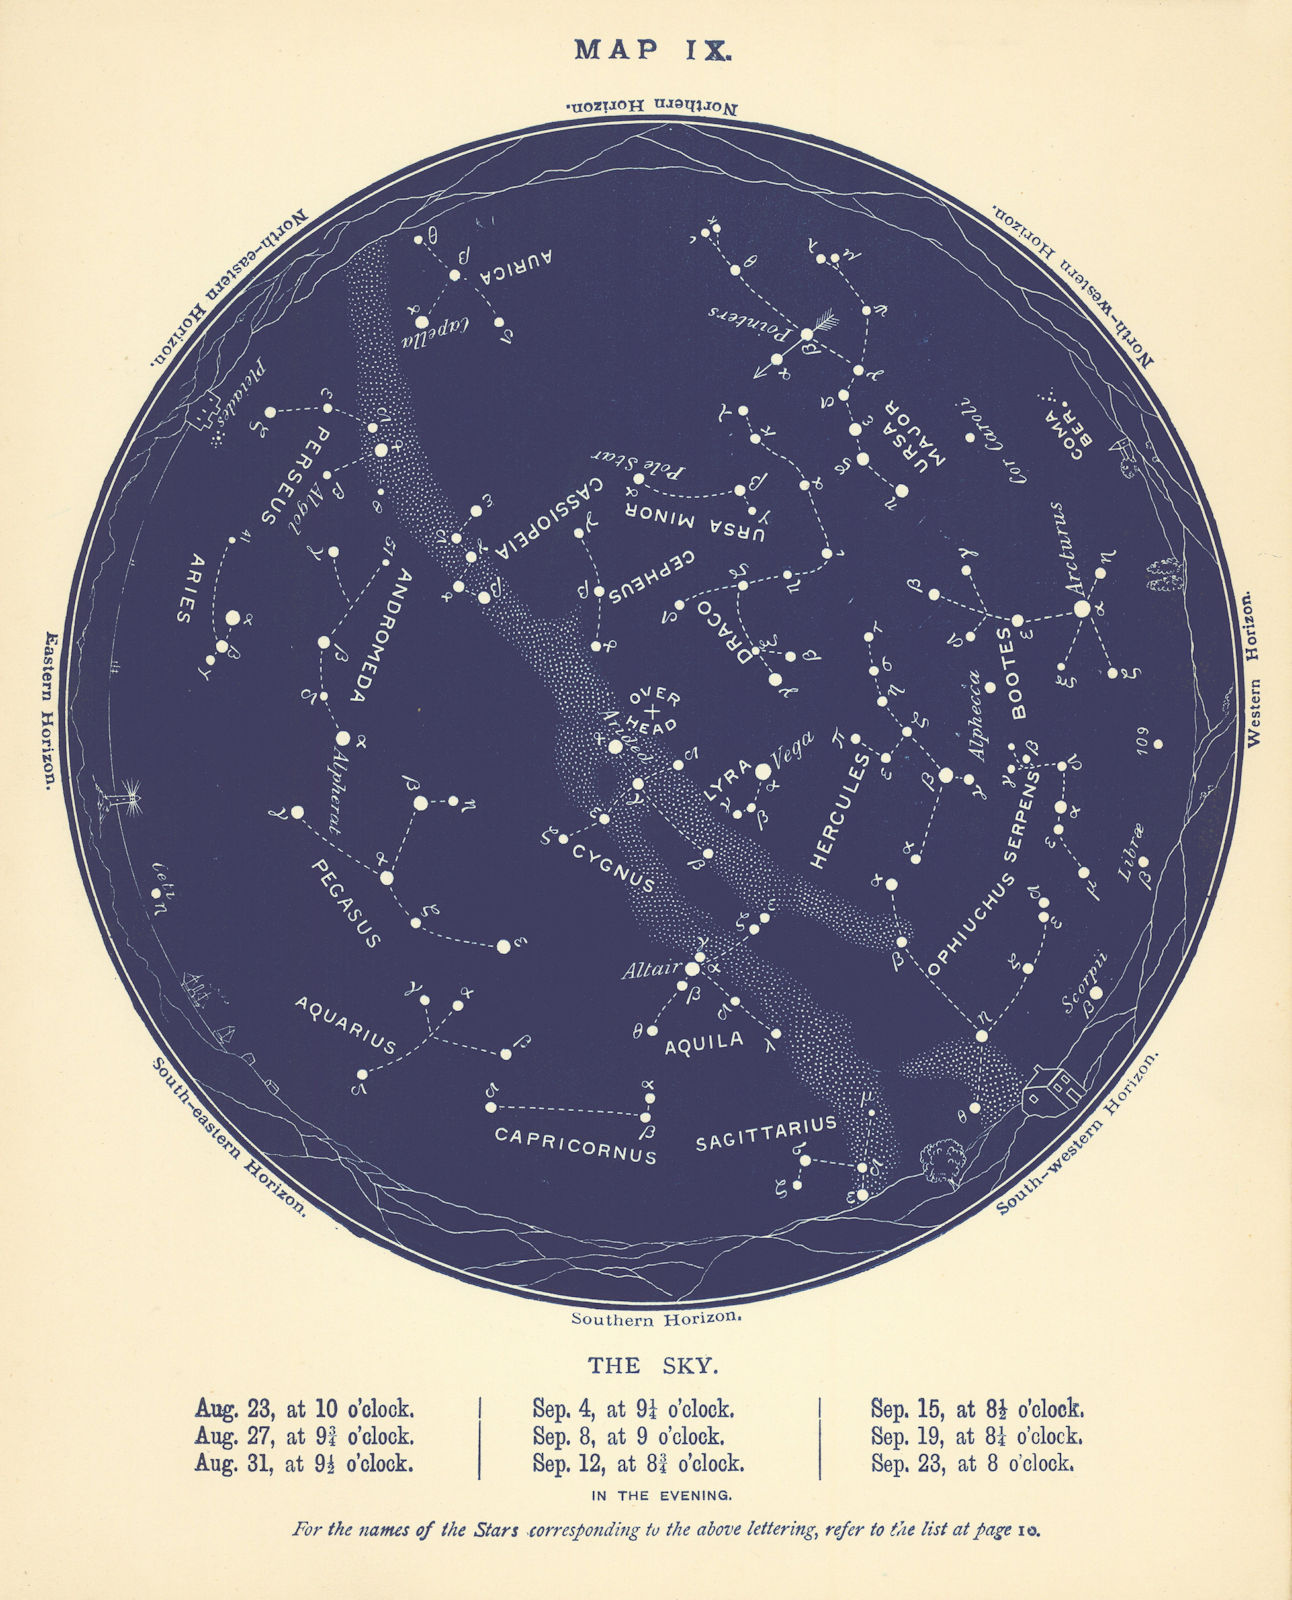 STAR MAP IX. The Night Sky. August-September. Astronomy. PROCTOR 1896 old